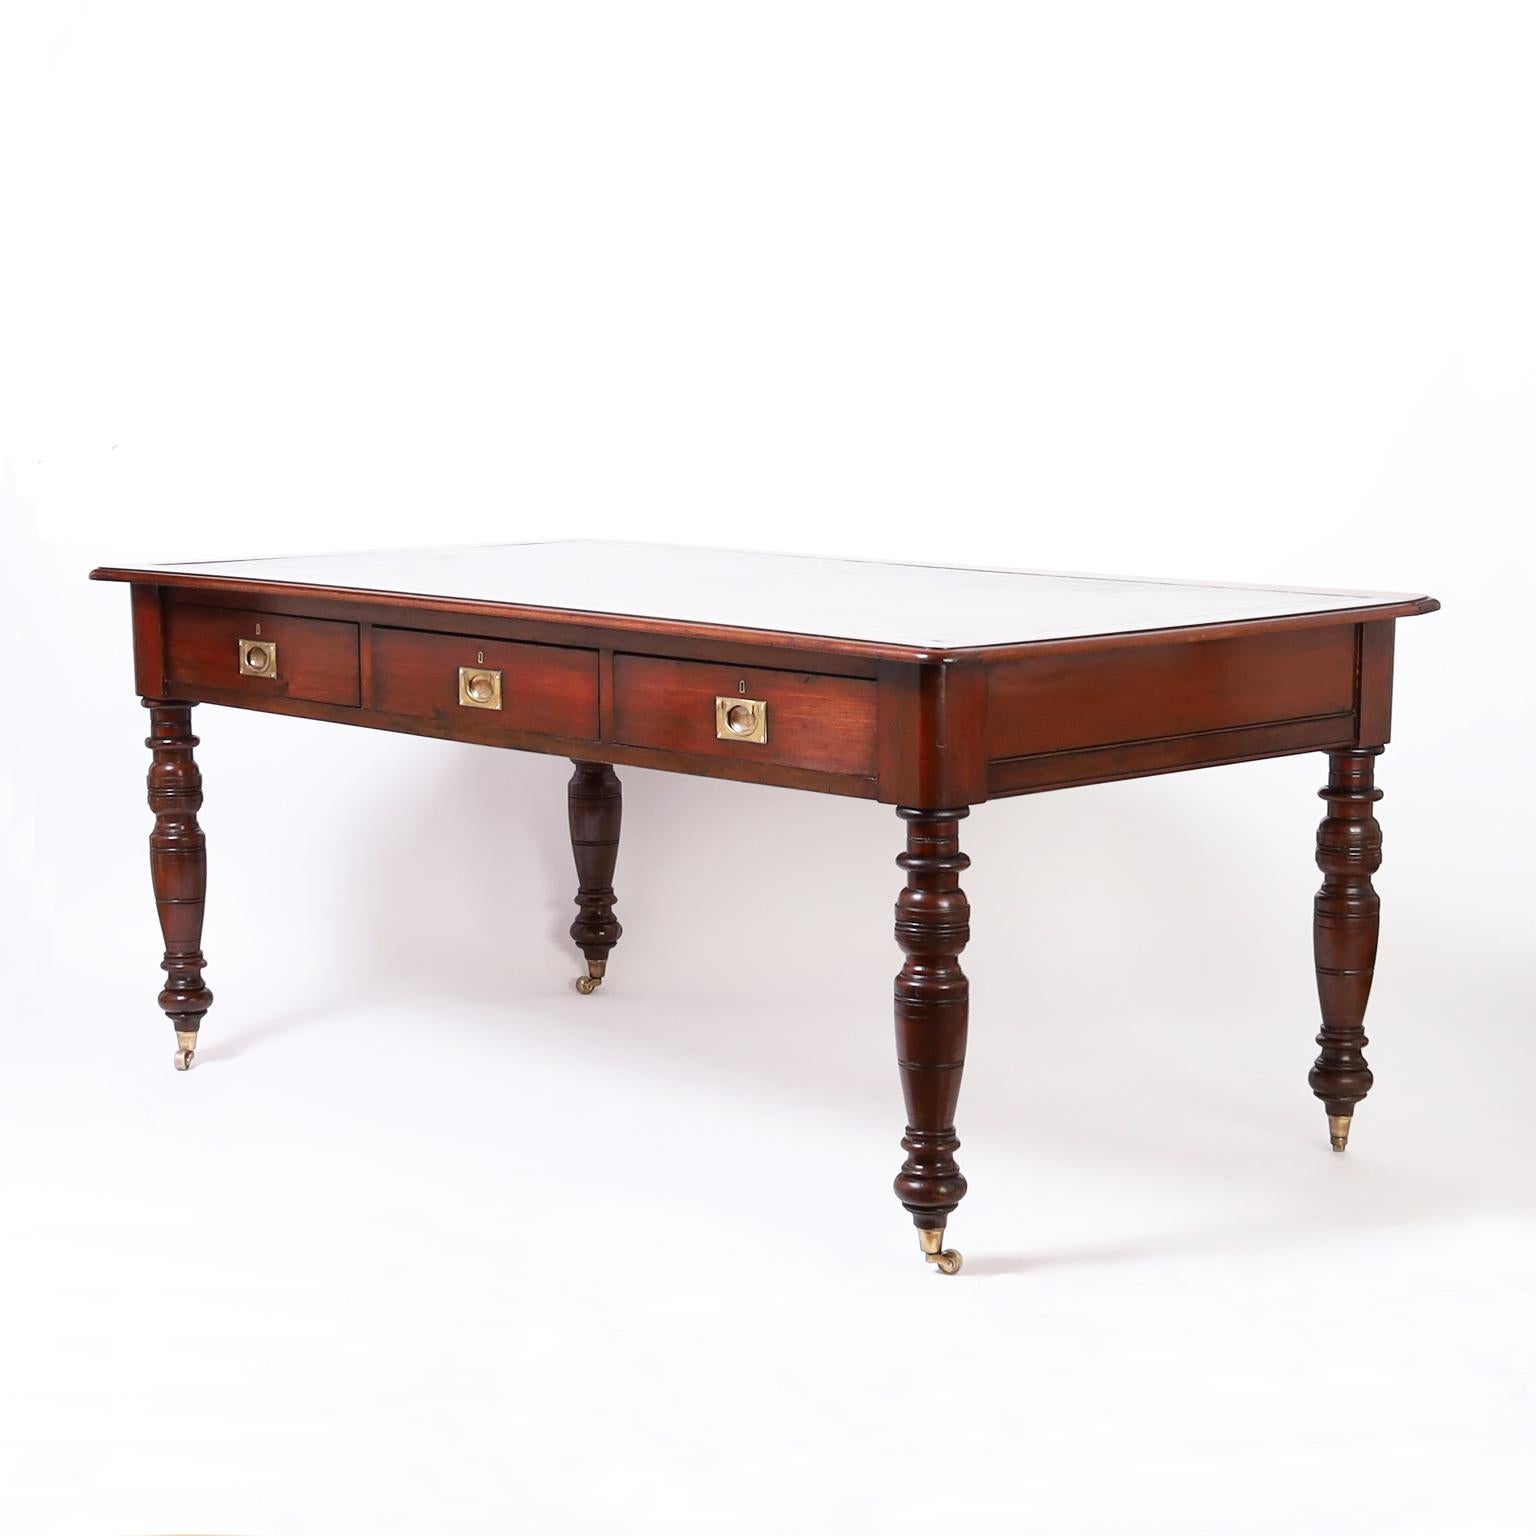 British Colonial British Colonia Style Leather Top Desk or Writing Table